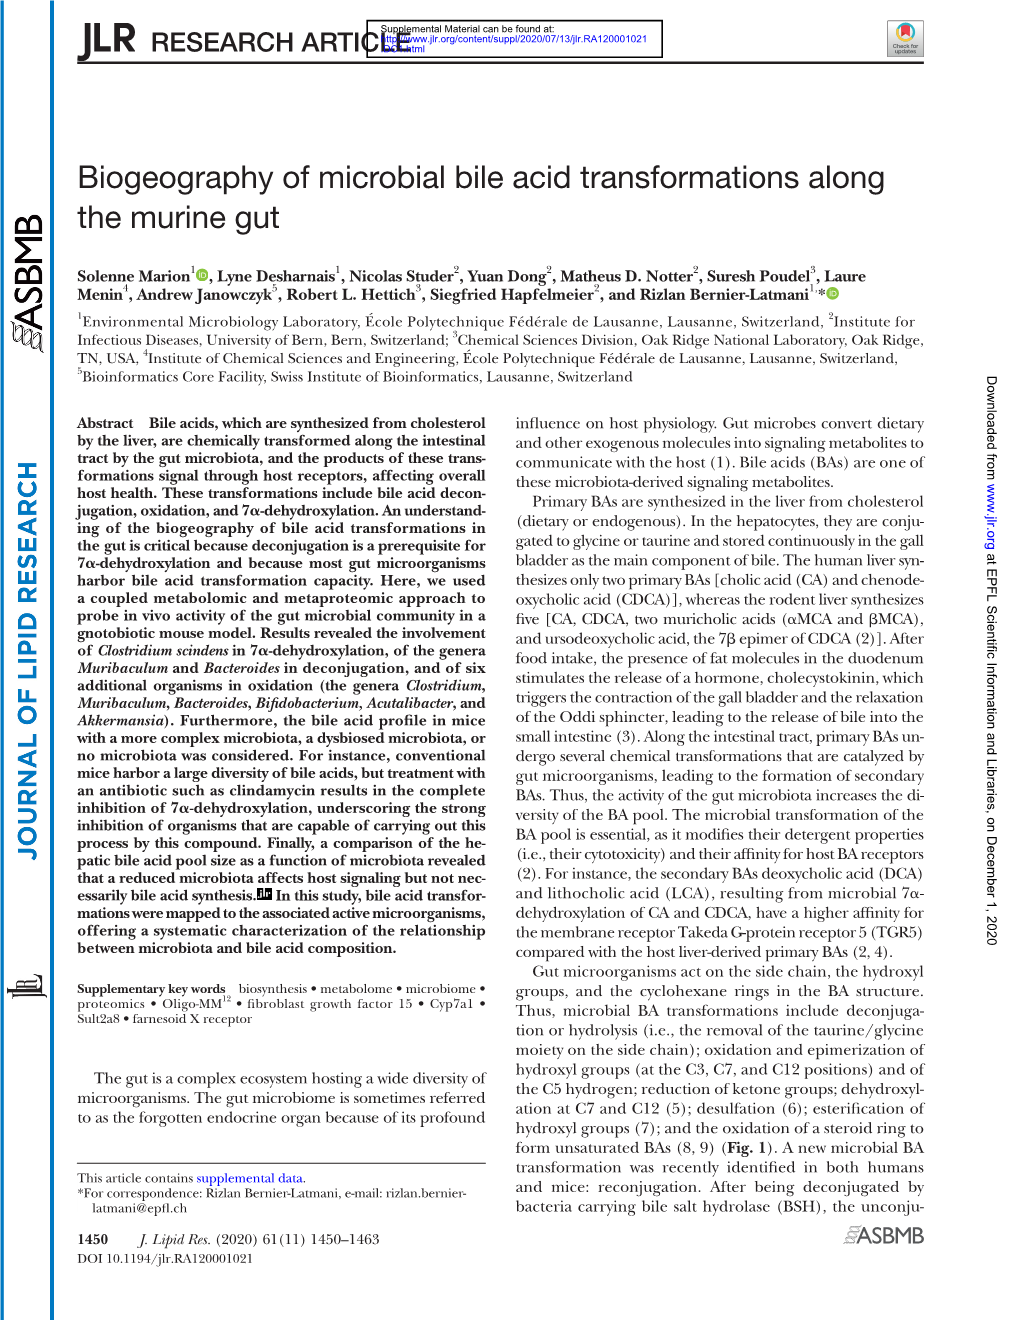 Biogeography of Microbial Bile Acid Transformations Along the Murine Gut